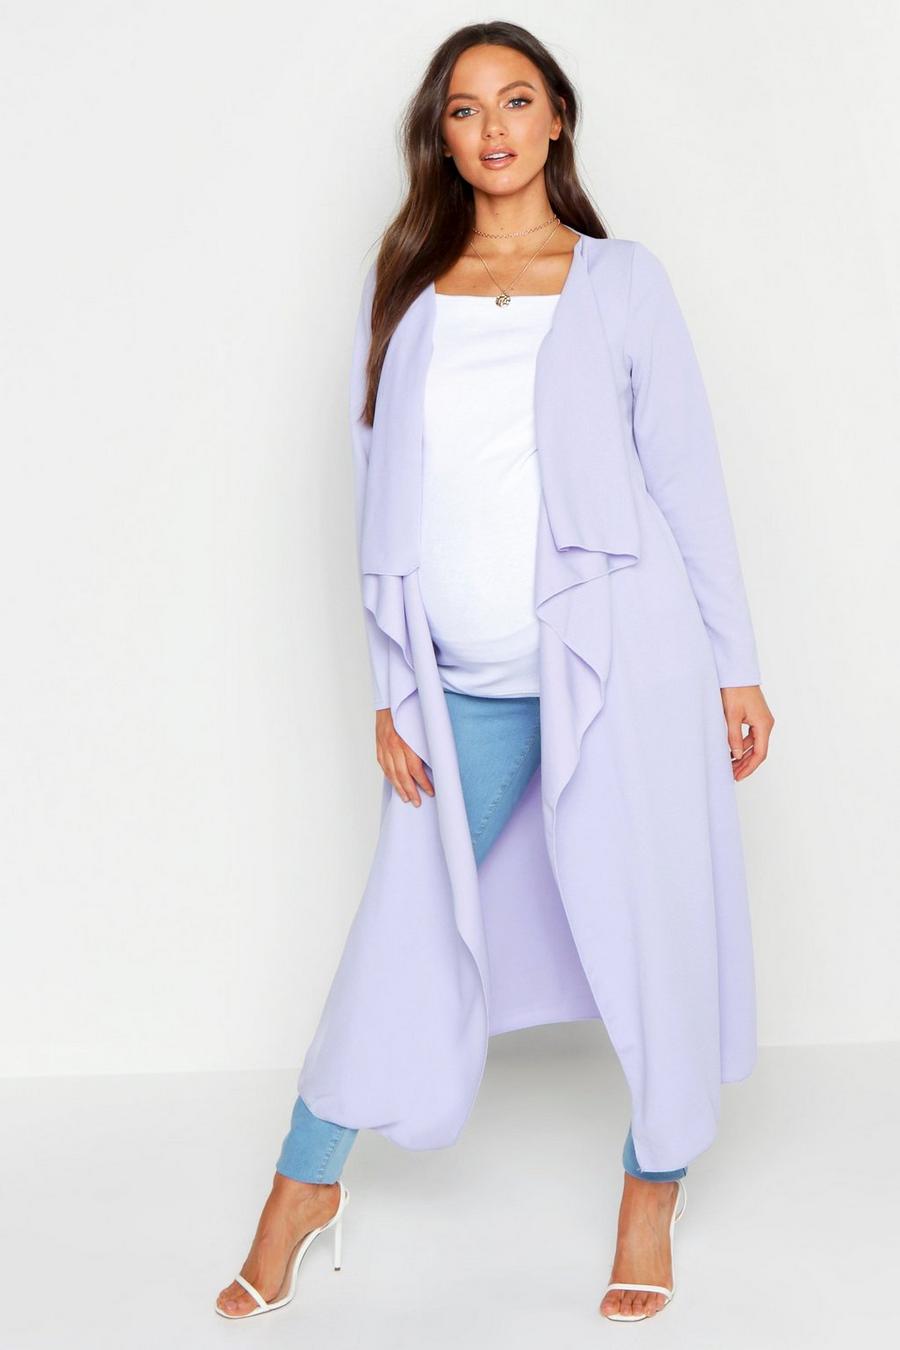 Lilac Maternity Waterfall Duster Jacket